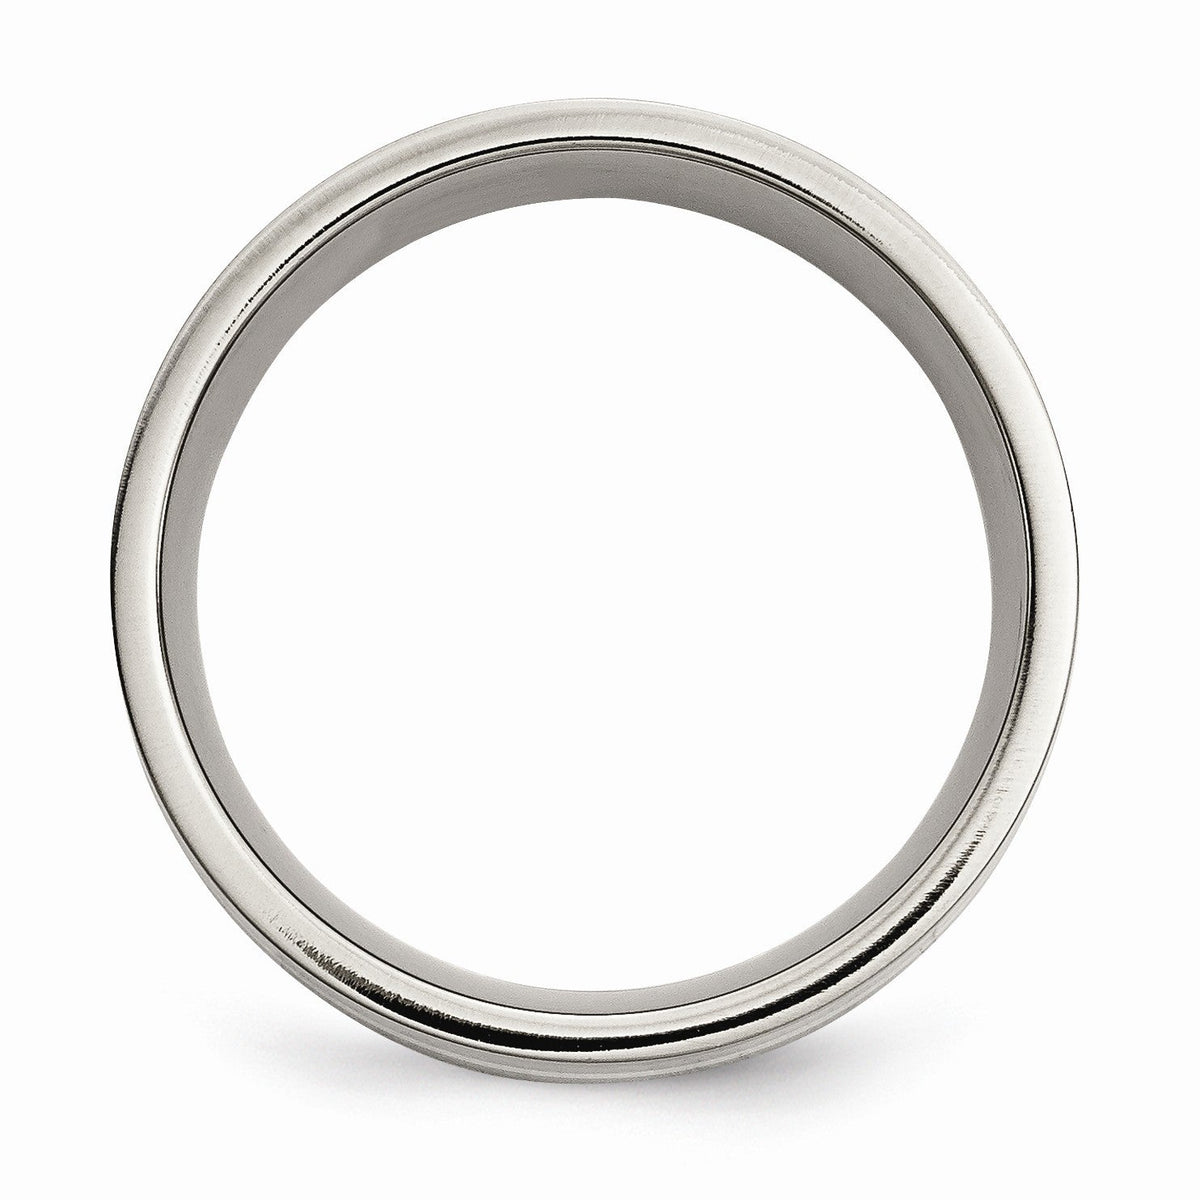 Alternate view of the Titanium &amp; Sterling Silver Inlay, 8mm Polished Flat Comfort Fit Band by The Black Bow Jewelry Co.